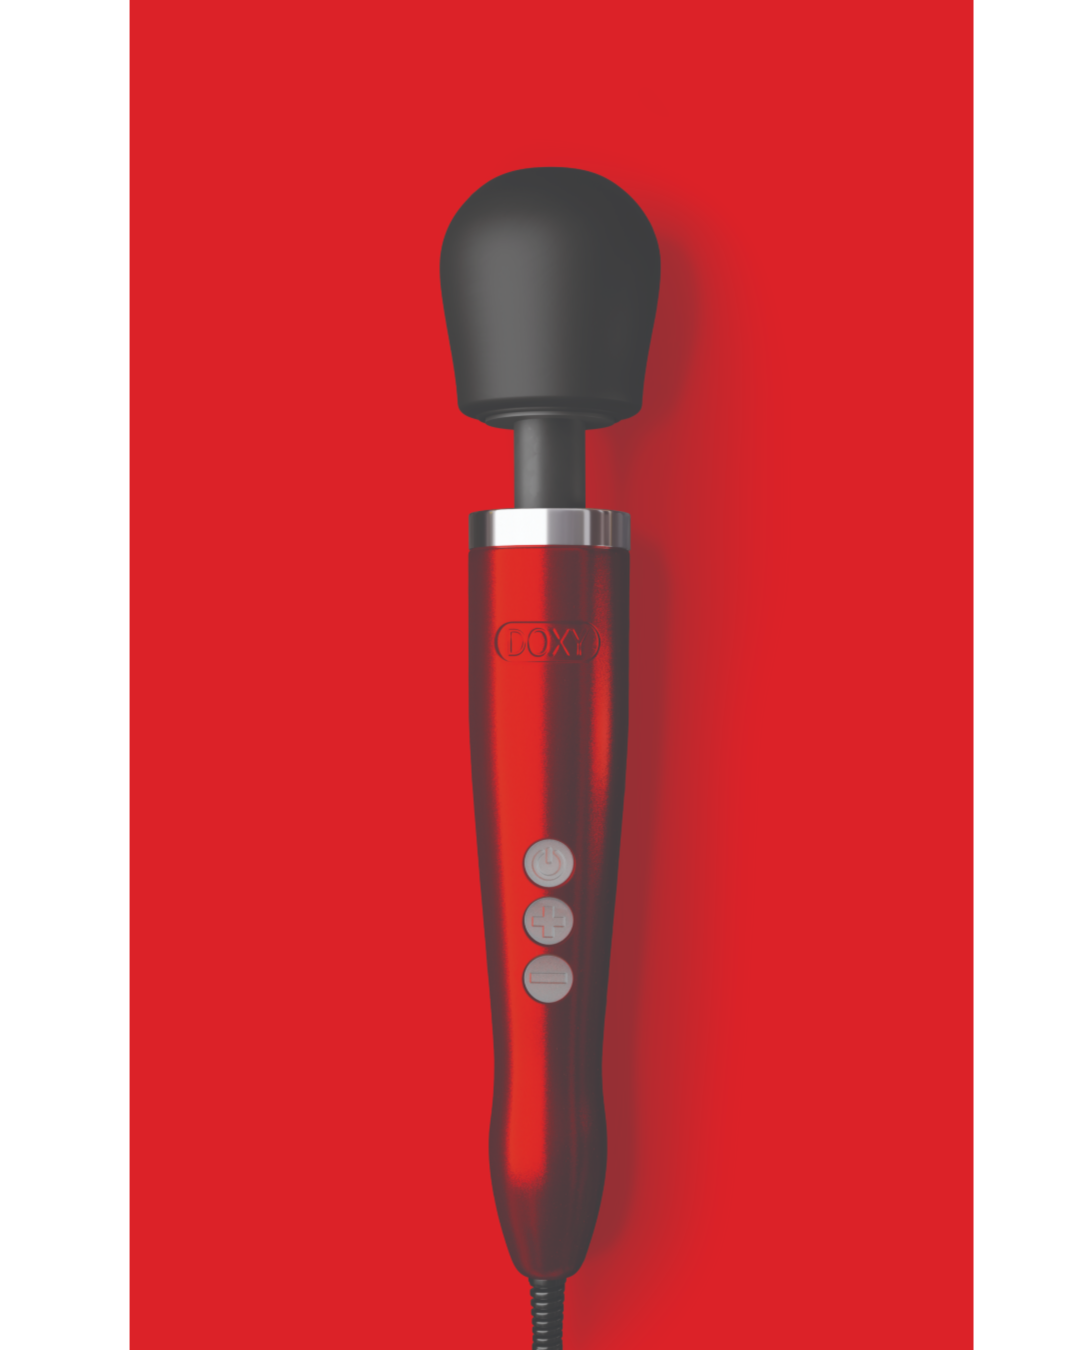 Doxy Die Cast Extra Powerful Massage Wand Vibrator - Red product close up 